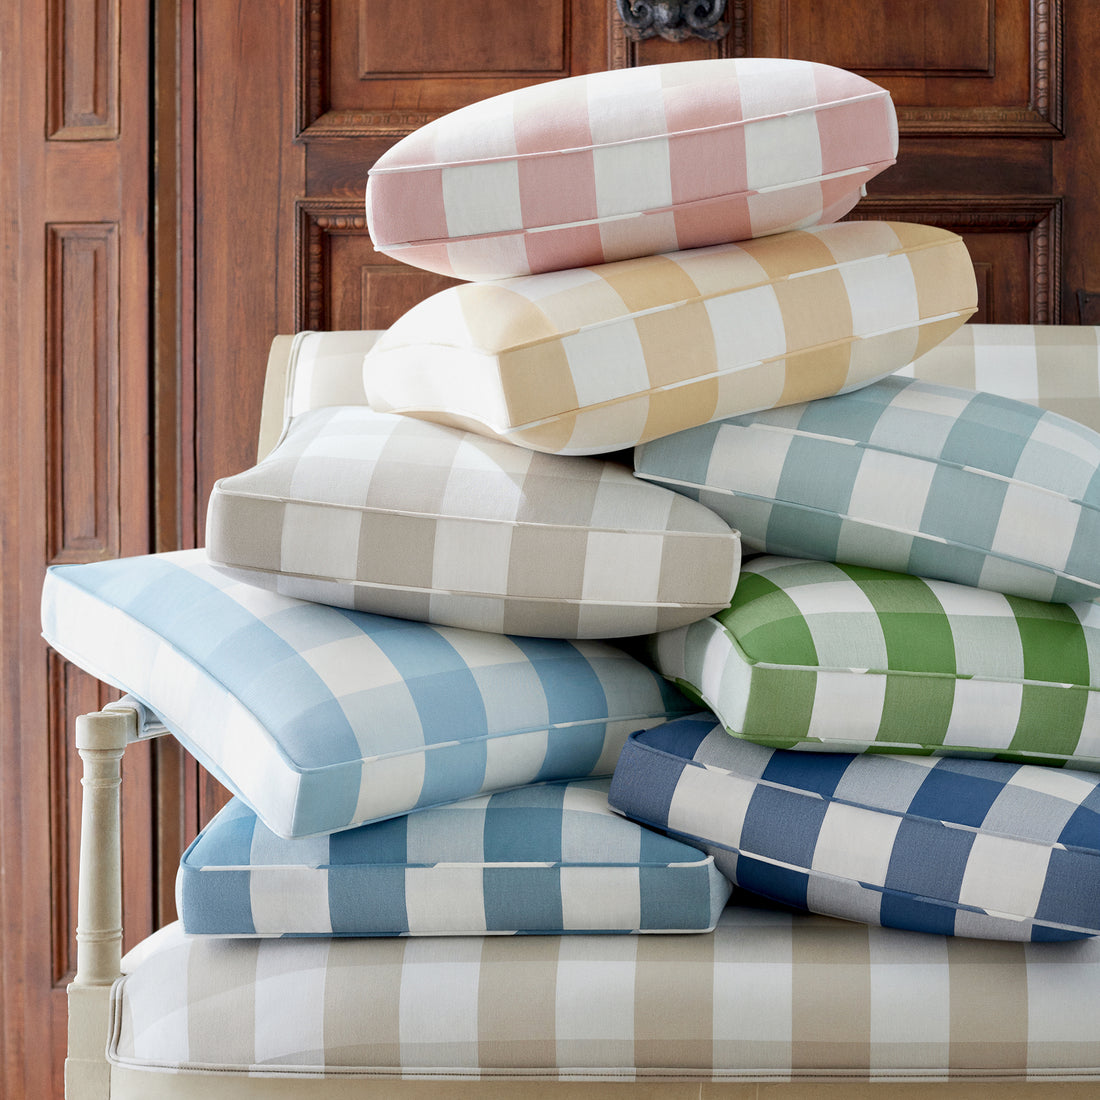 Pillows in Hammond Check woven fabric - pattern number AW24503 - by Anna French in the Devon collection